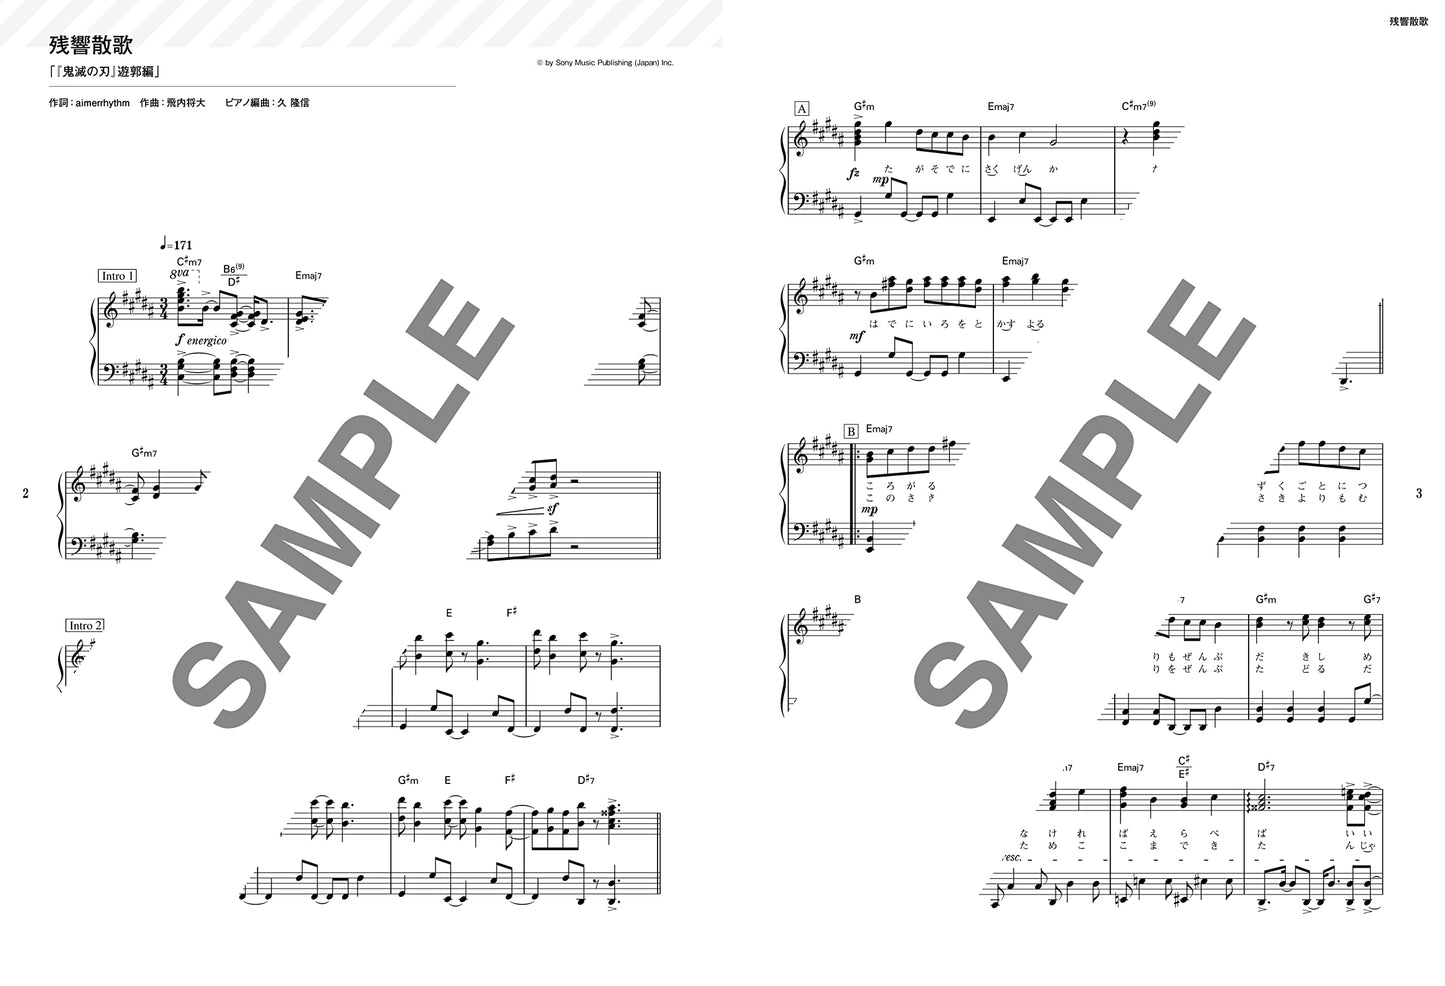 Anime Songs(Anison) for Piano Solo that you really want to play!!(Intermediate) Sheet Music Book